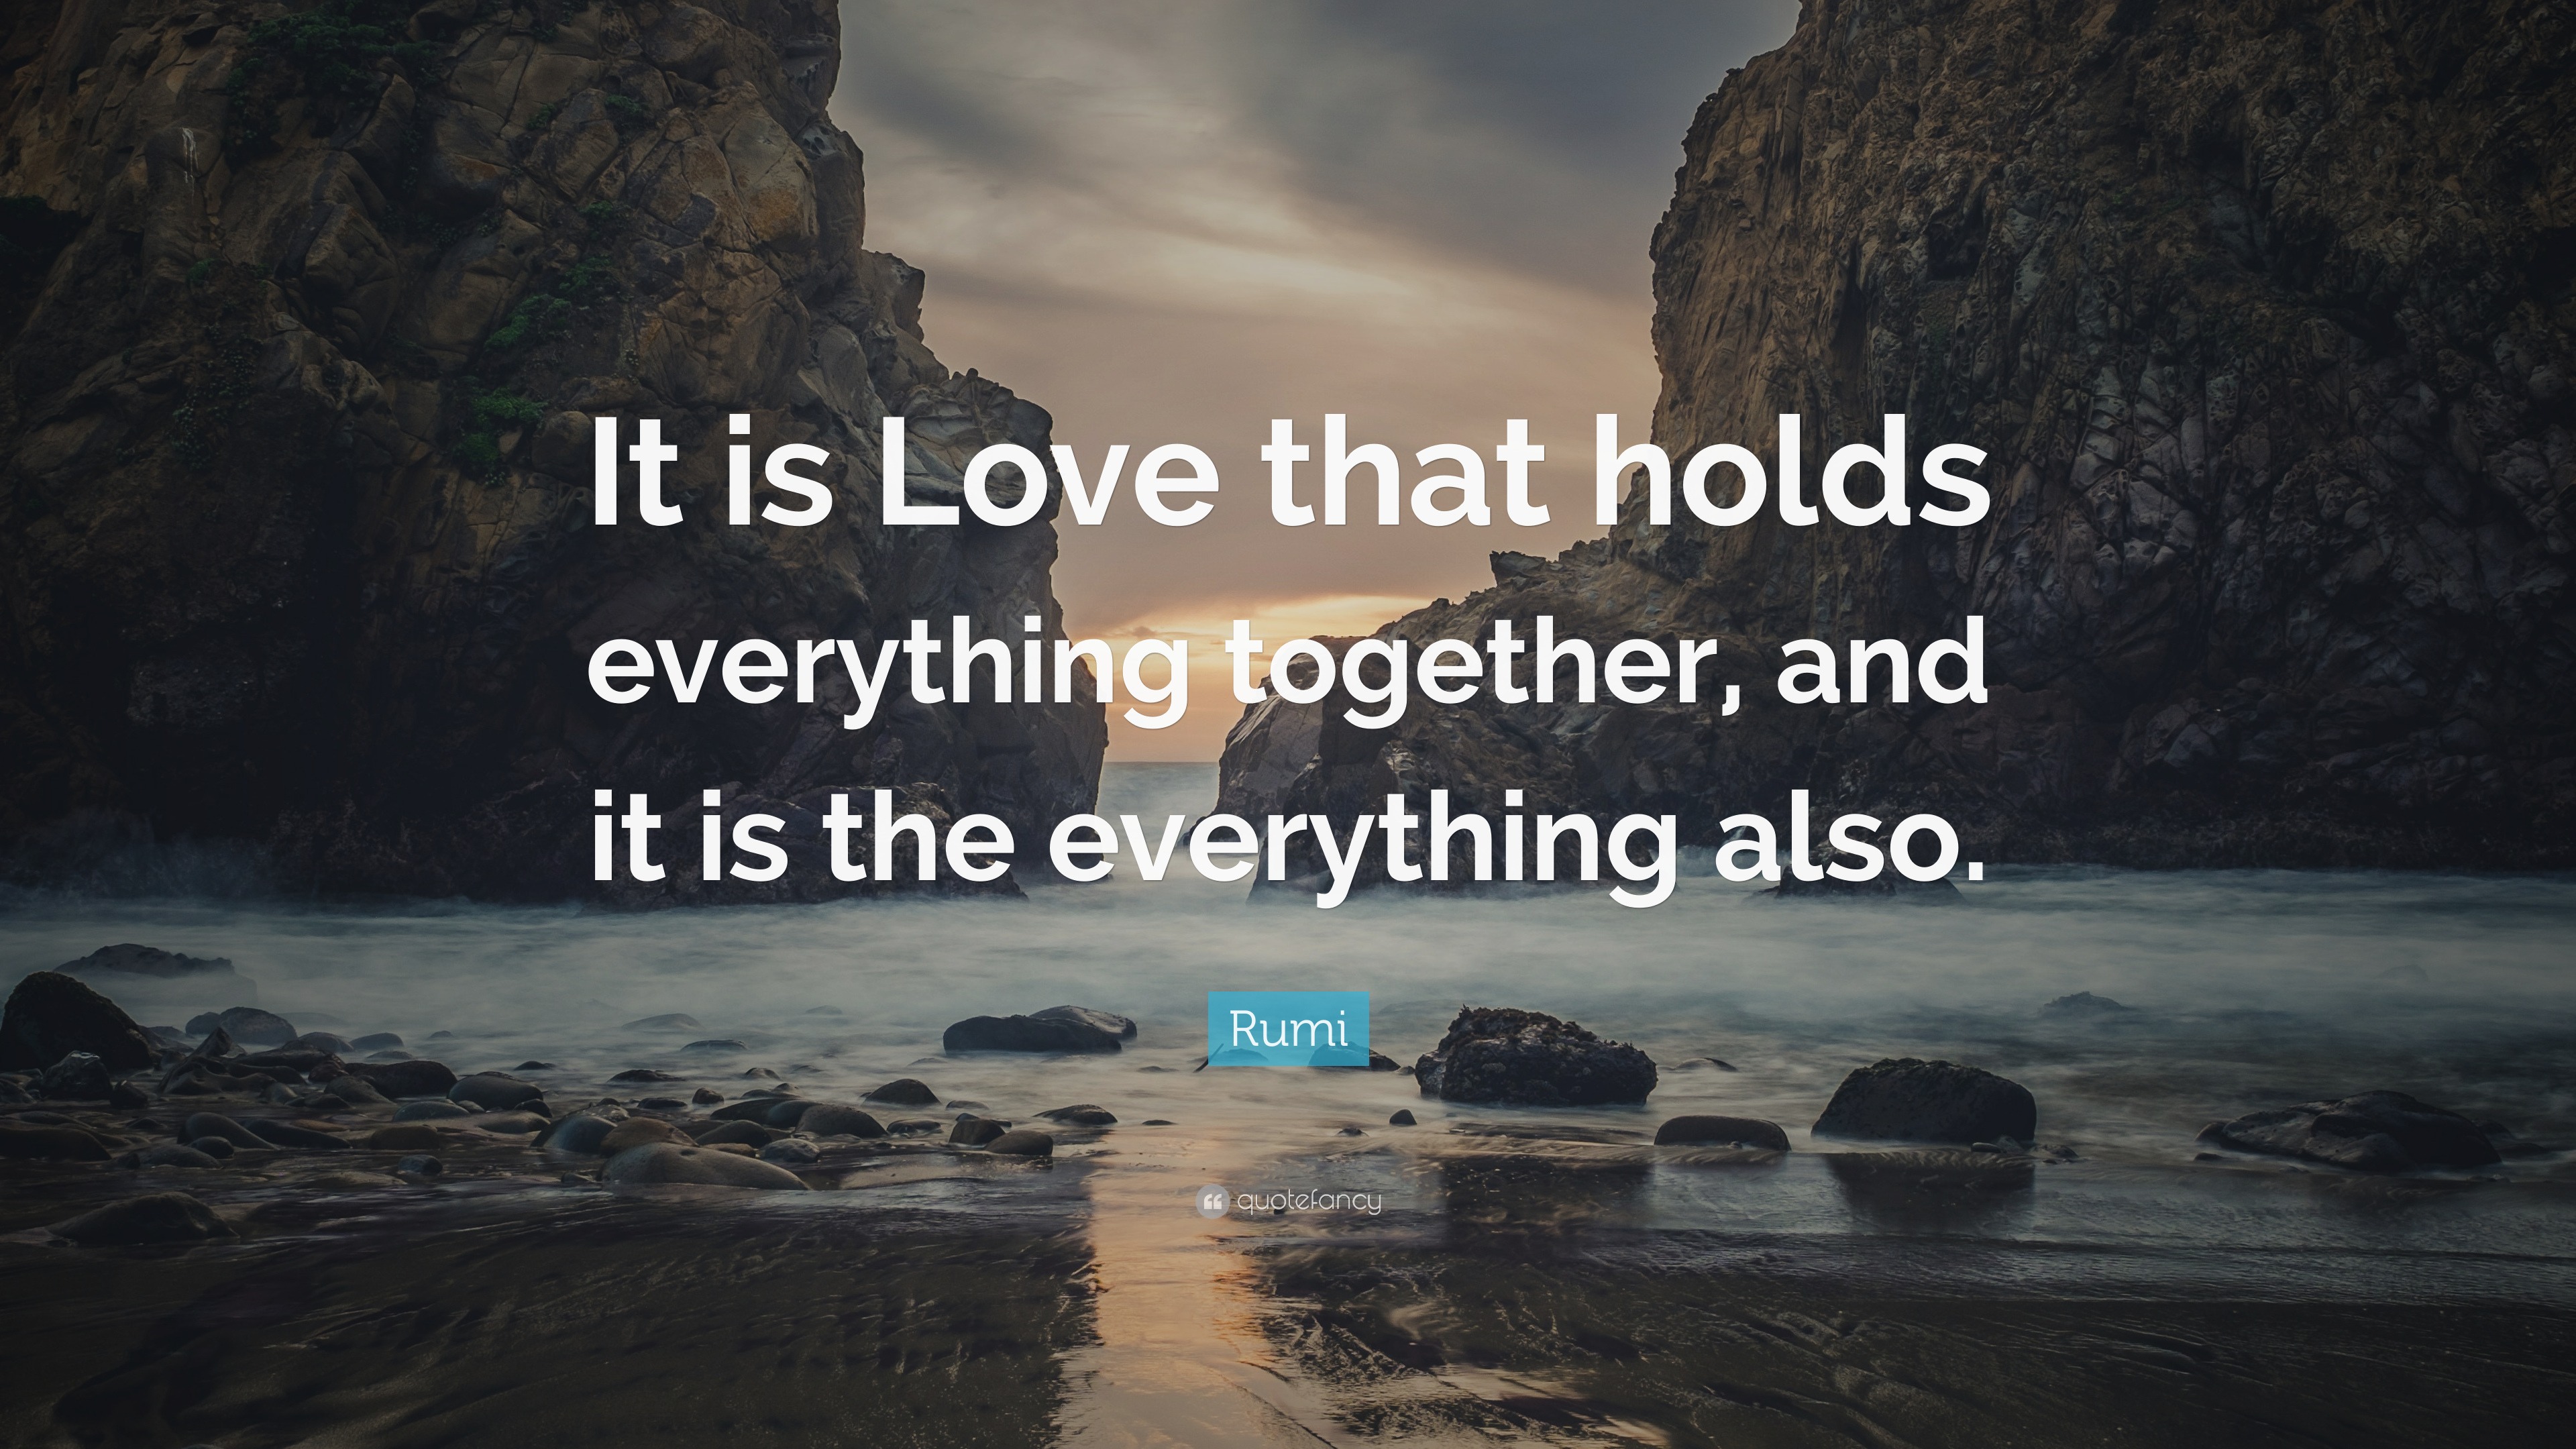 Rumi Quote “It is Love that holds everything together